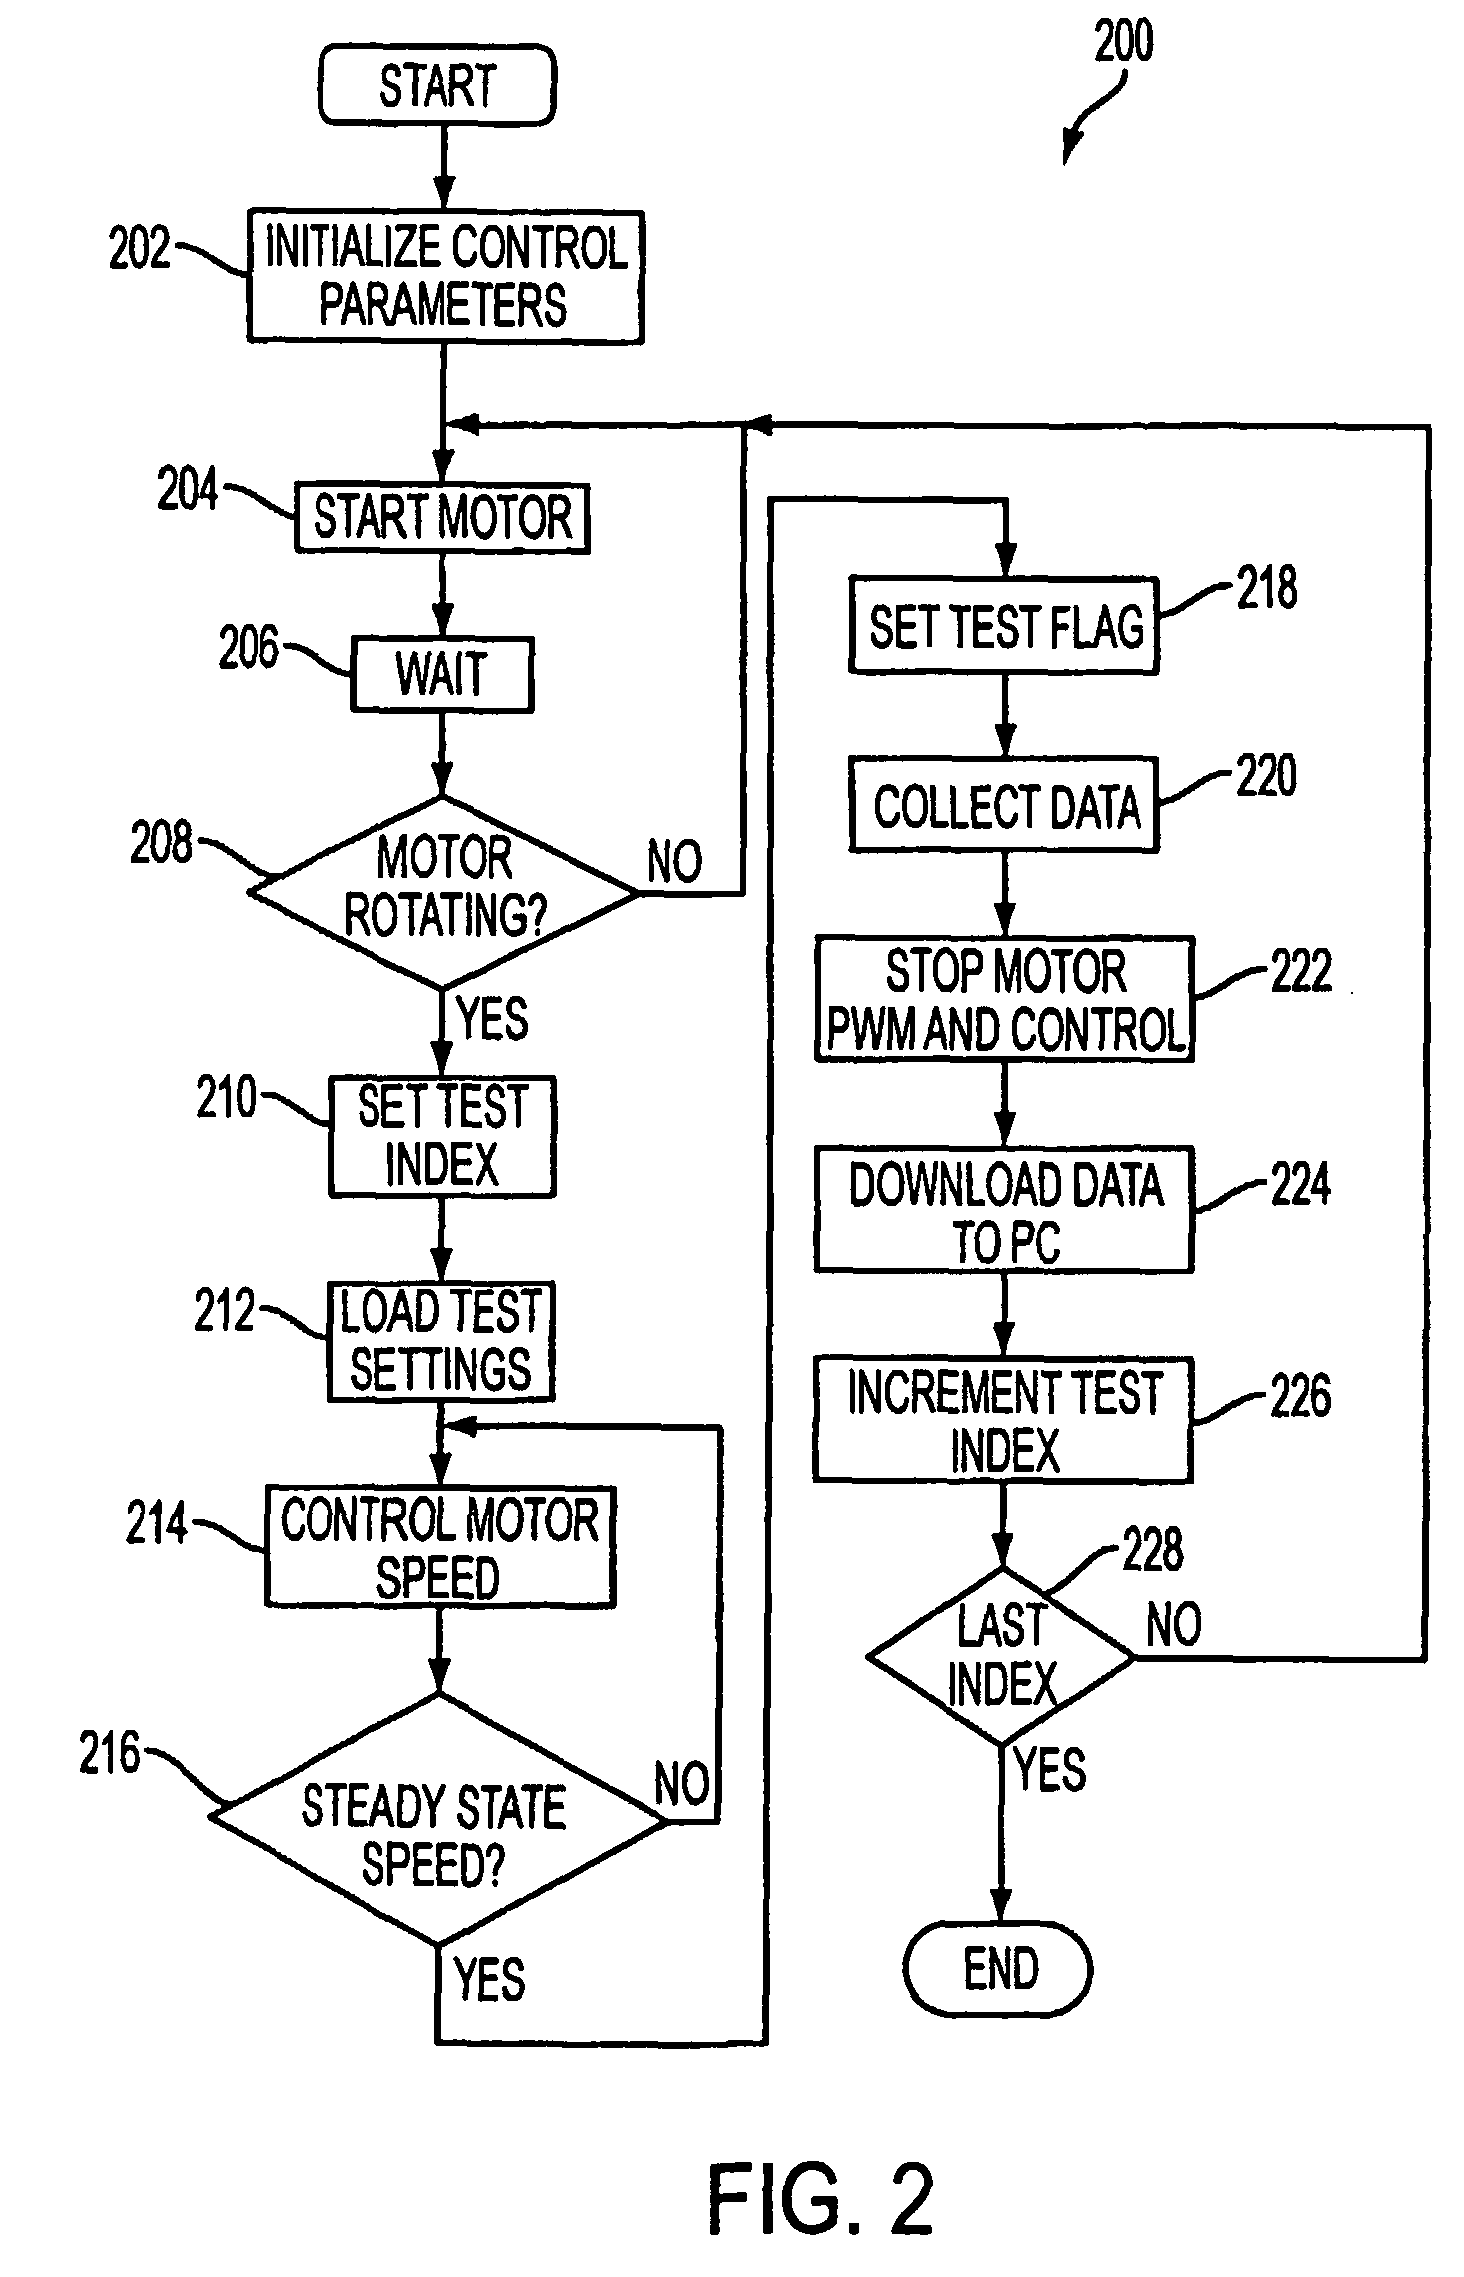 Neural network and method for estimating regions of motor operation from information characterizing the motor